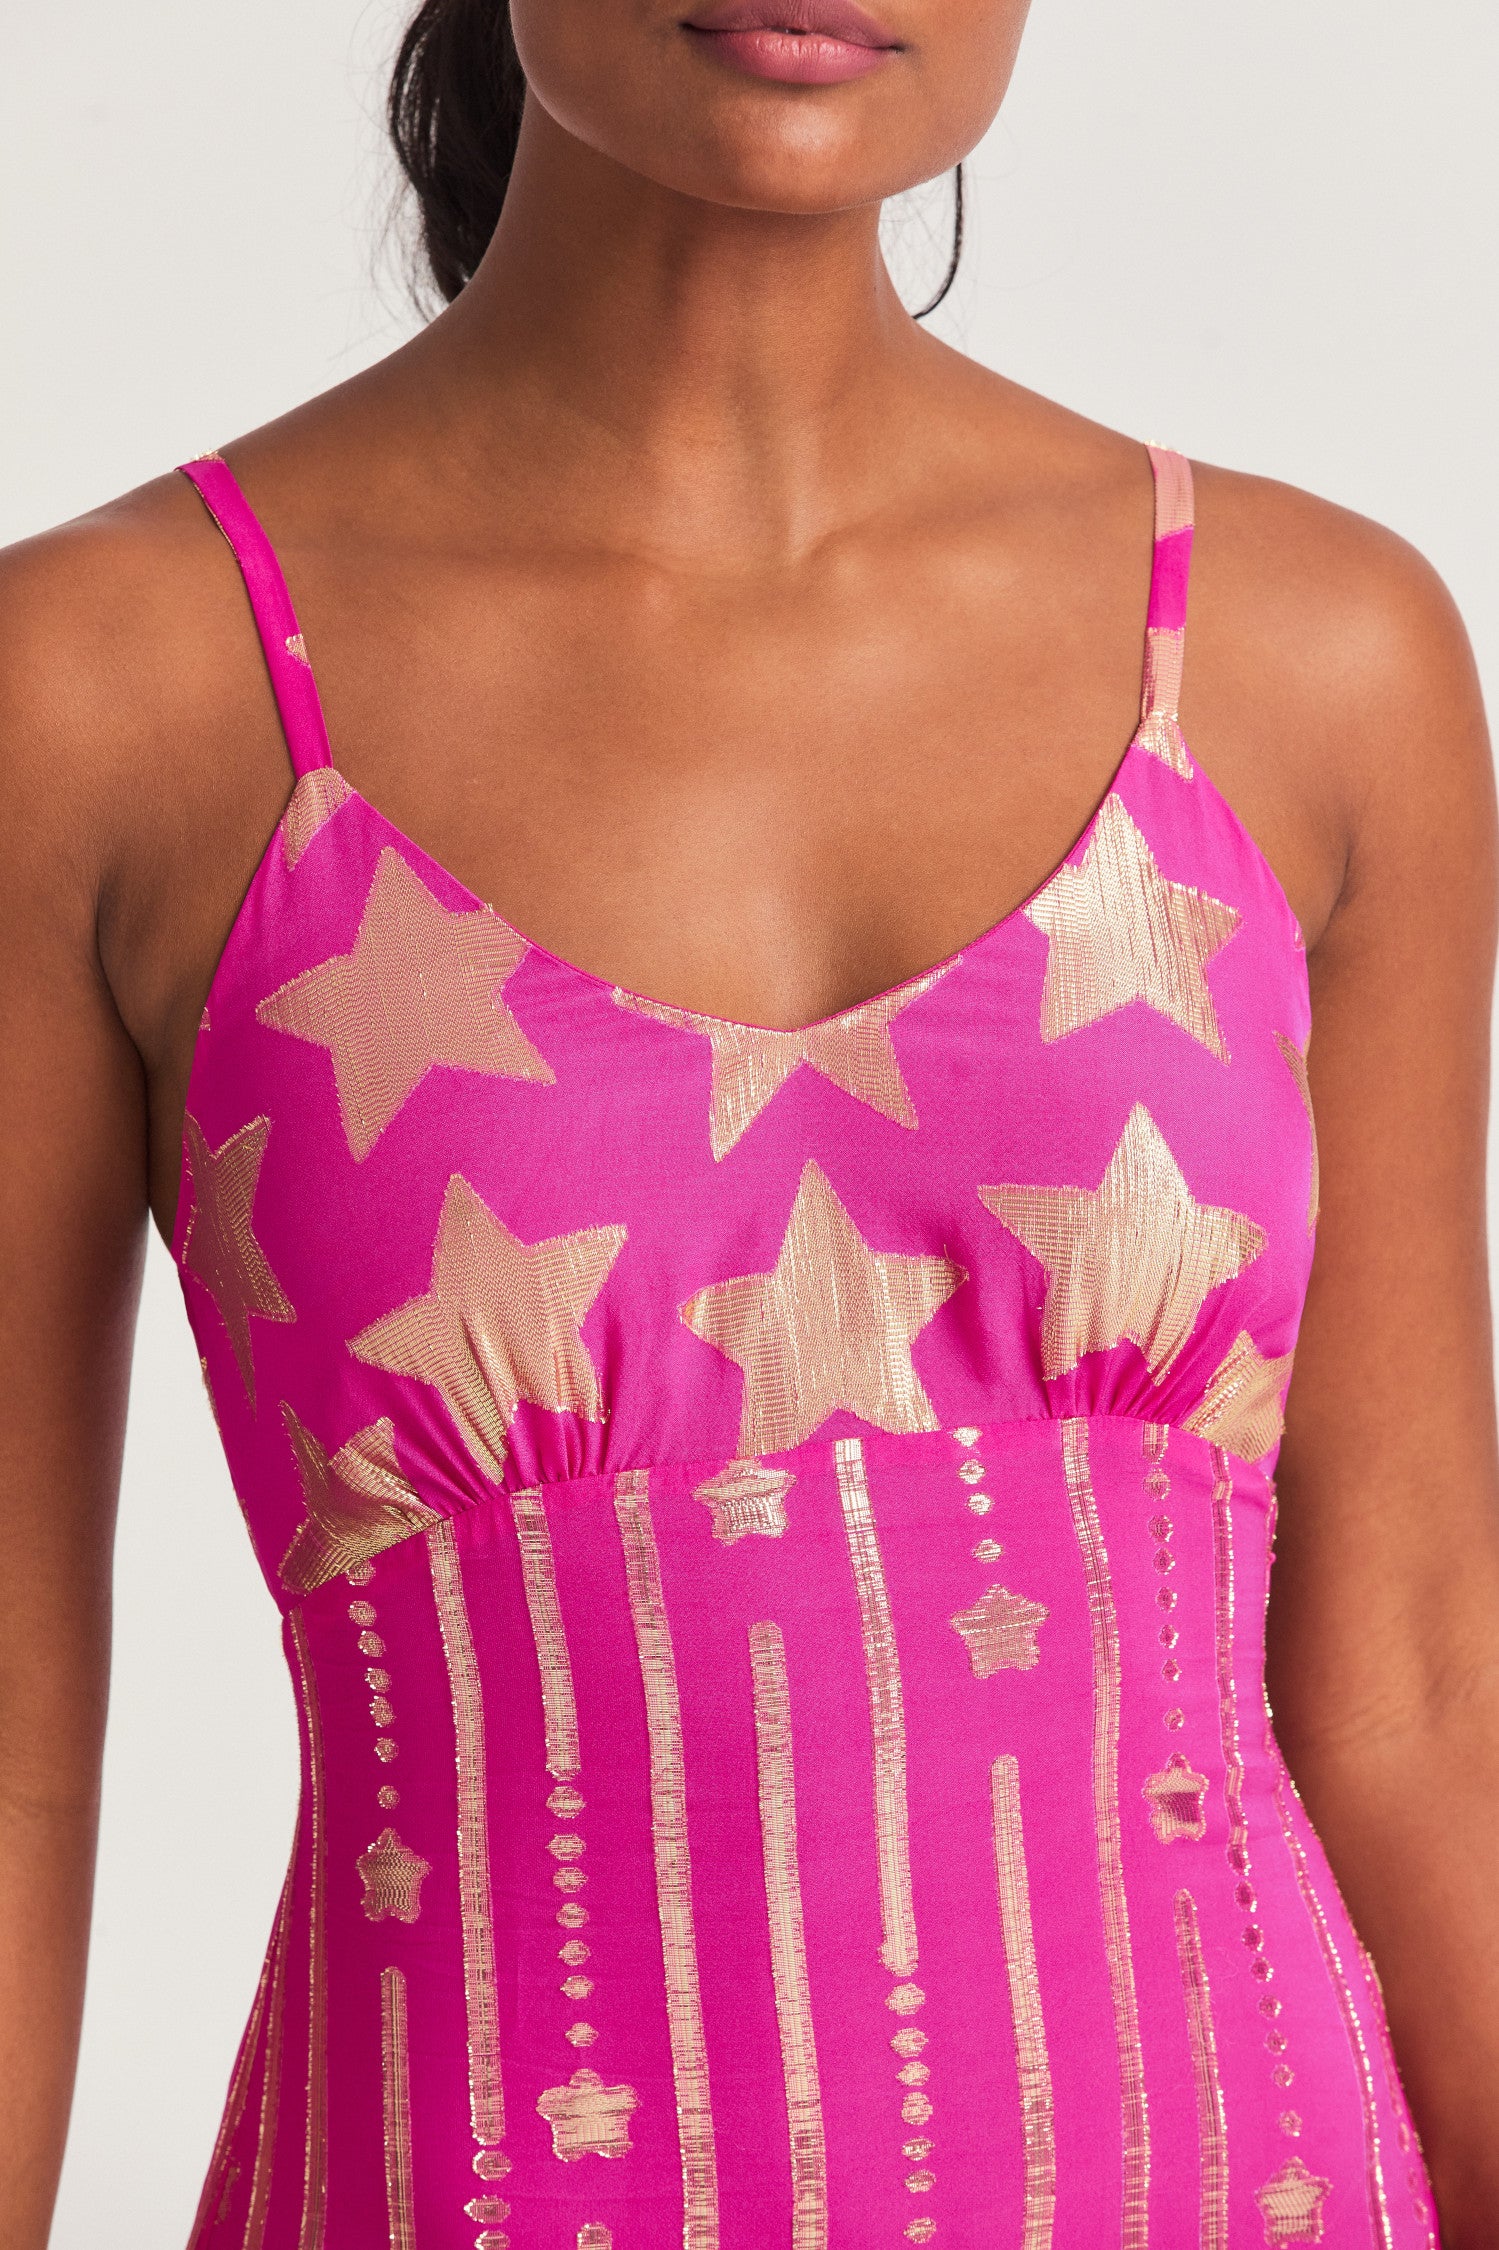  Pink maxi slip dress with metallic gold star detailing with vertical falling stars contrasting along the skirt. In a soft viscose fabric with strap detail at the back that allows you to tie the dress and a slit at the wearer’s left. The back waist features elastic to fit your body.